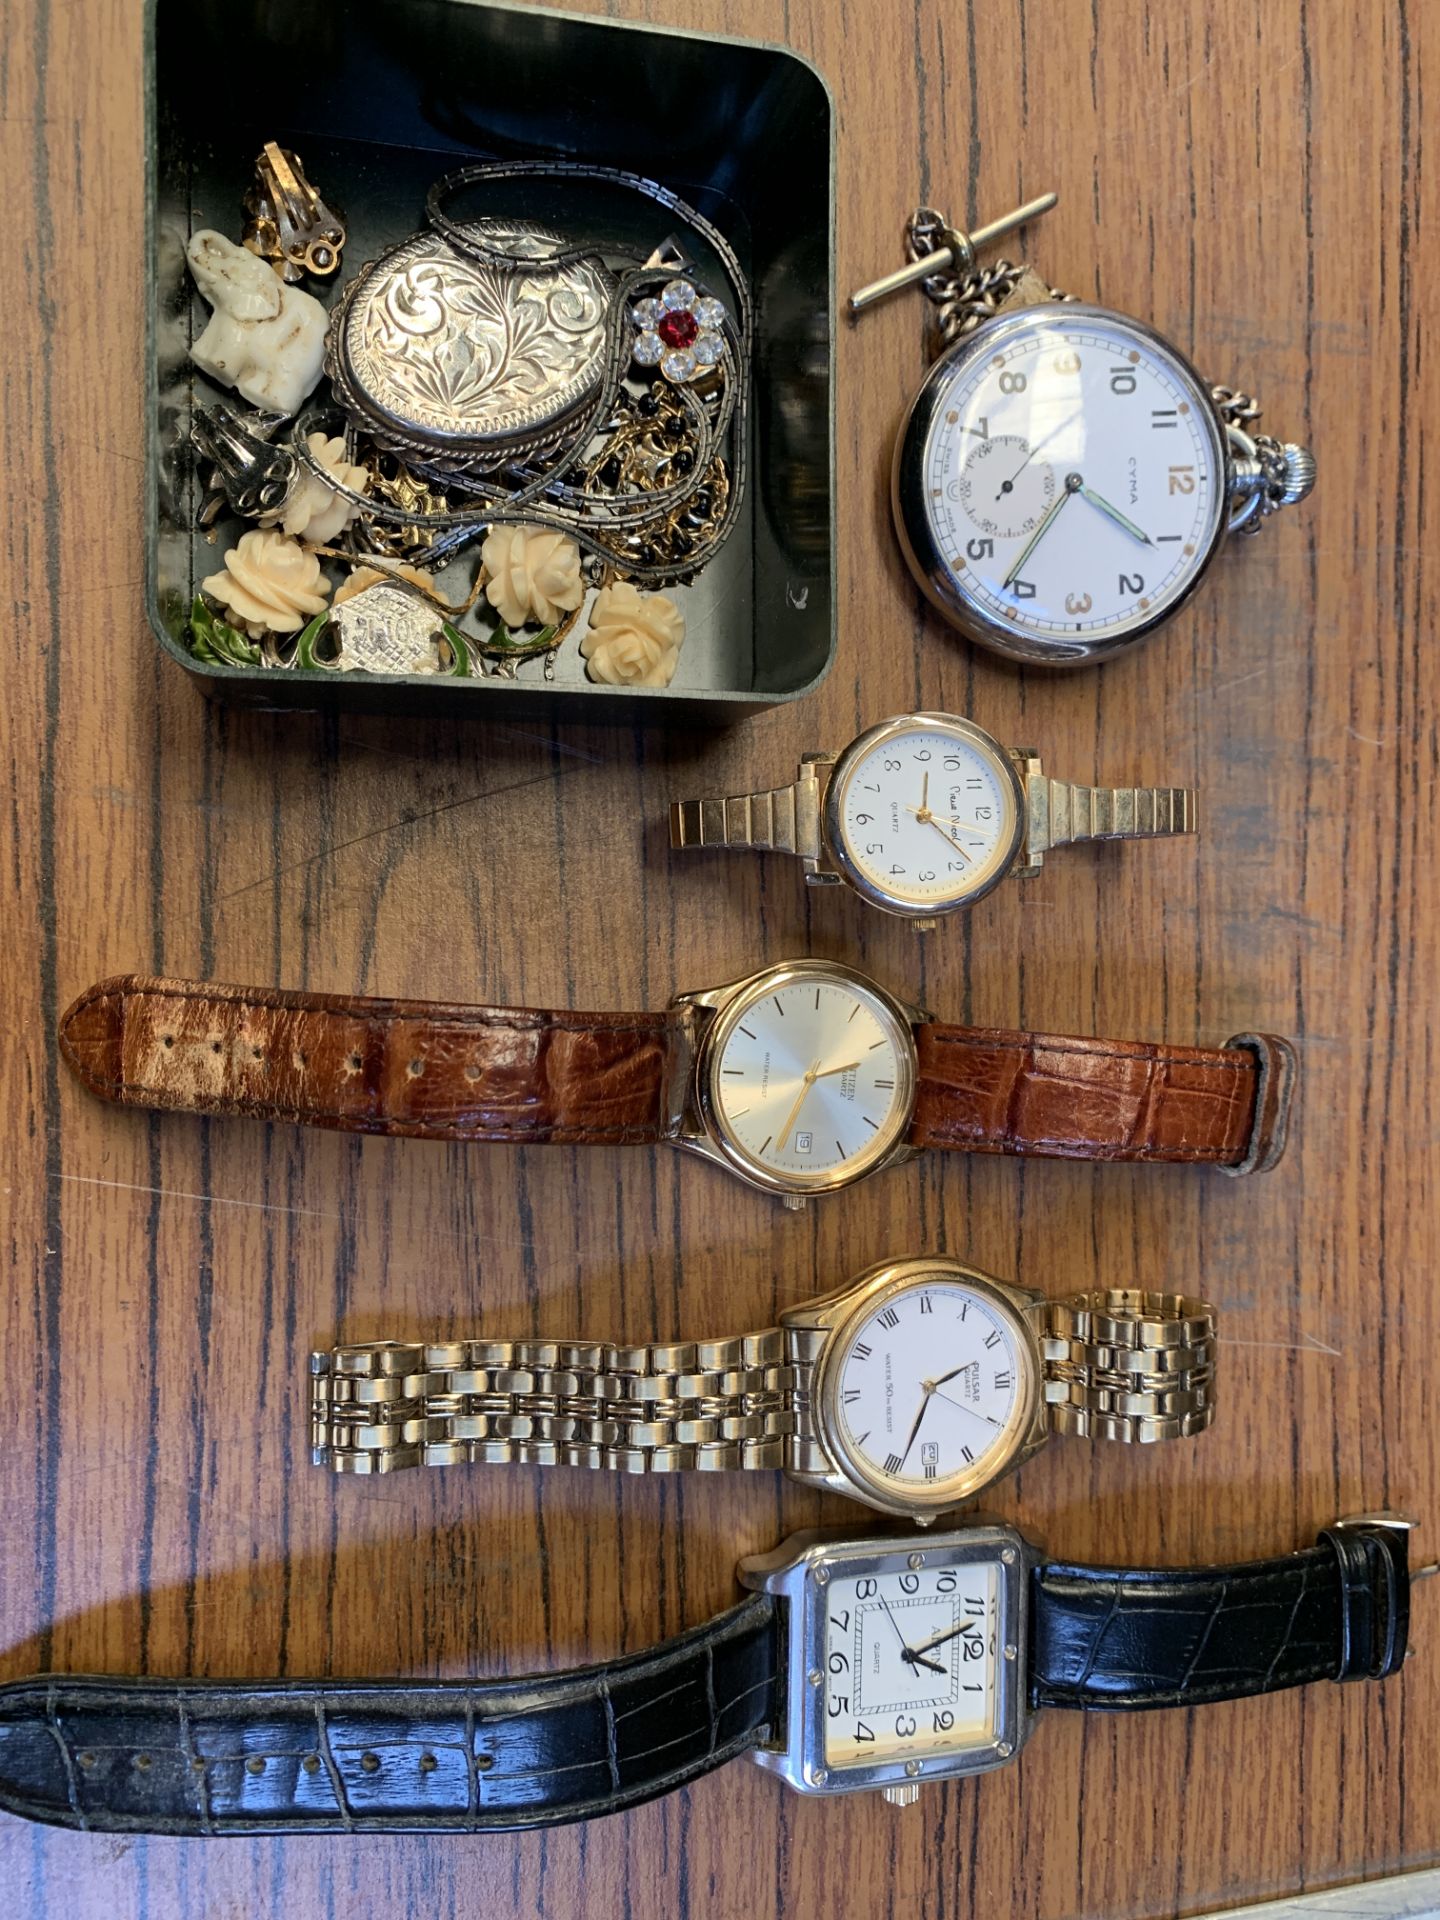 A small quantity of costume jewellery and wrist watches, together with a Cyma pocket watch